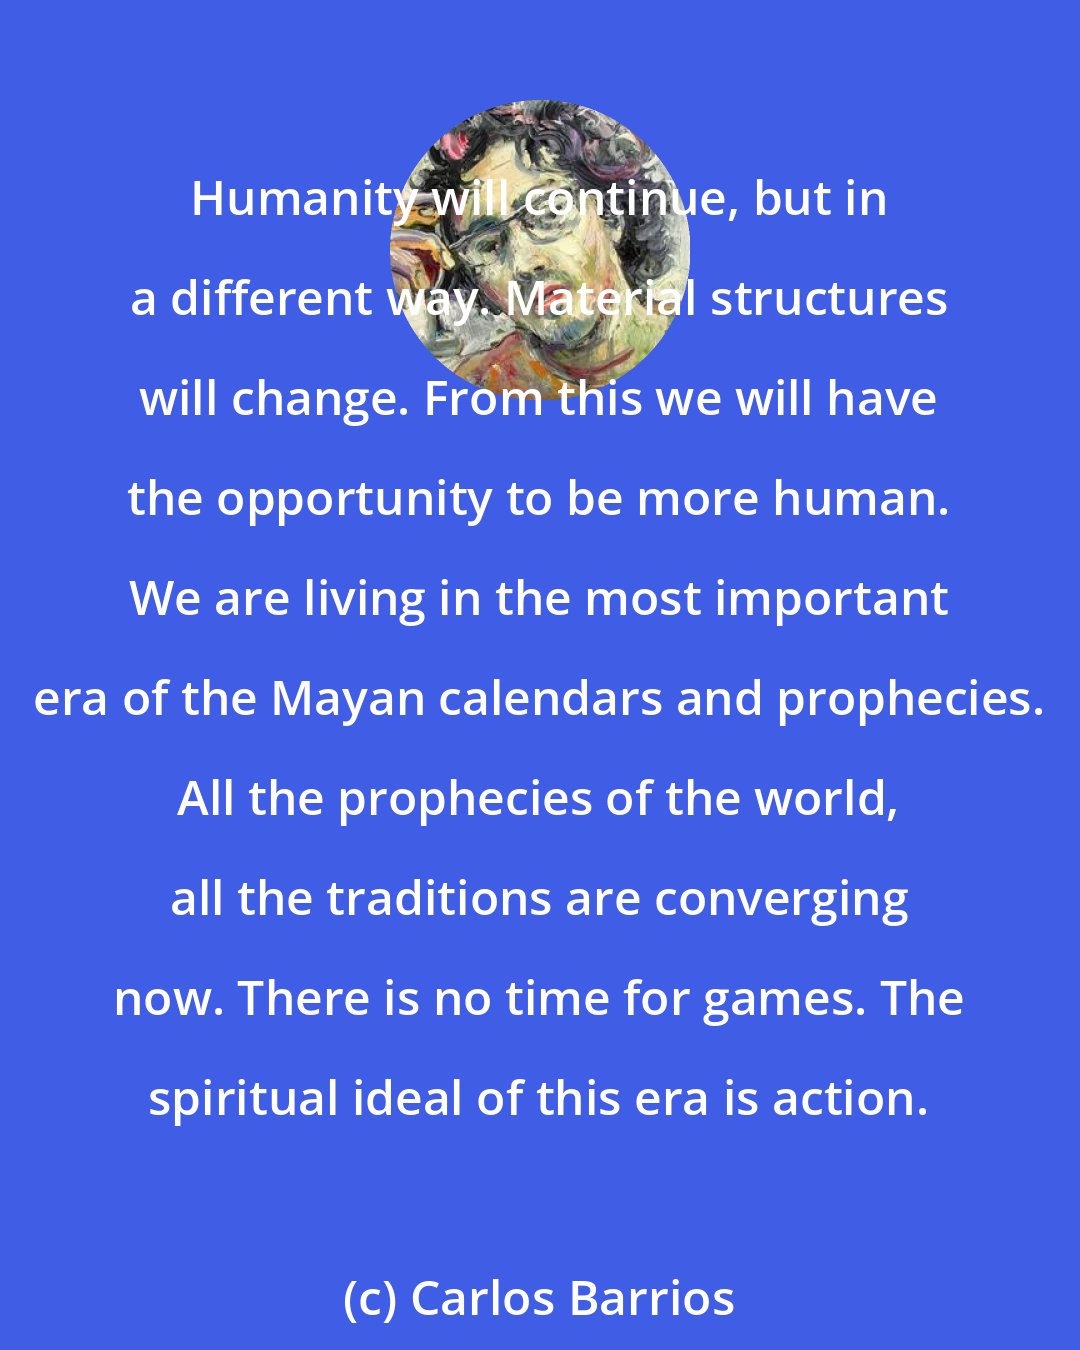 Carlos Barrios: Humanity will continue, but in a different way. Material structures will change. From this we will have the opportunity to be more human. We are living in the most important era of the Mayan calendars and prophecies. All the prophecies of the world, all the traditions are converging now. There is no time for games. The spiritual ideal of this era is action.